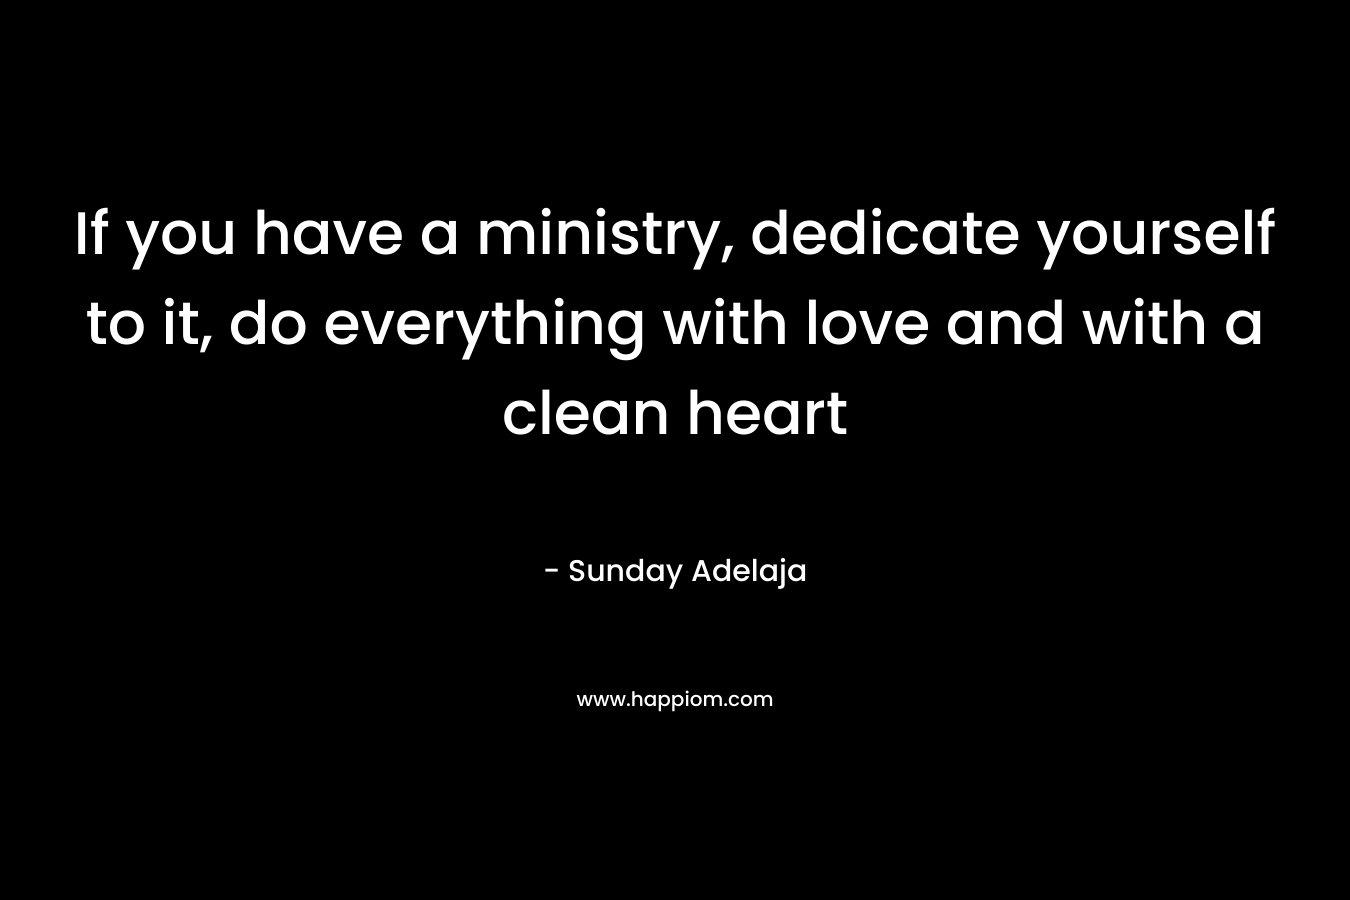 If you have a ministry, dedicate yourself to it, do everything with love and with a clean heart – Sunday Adelaja